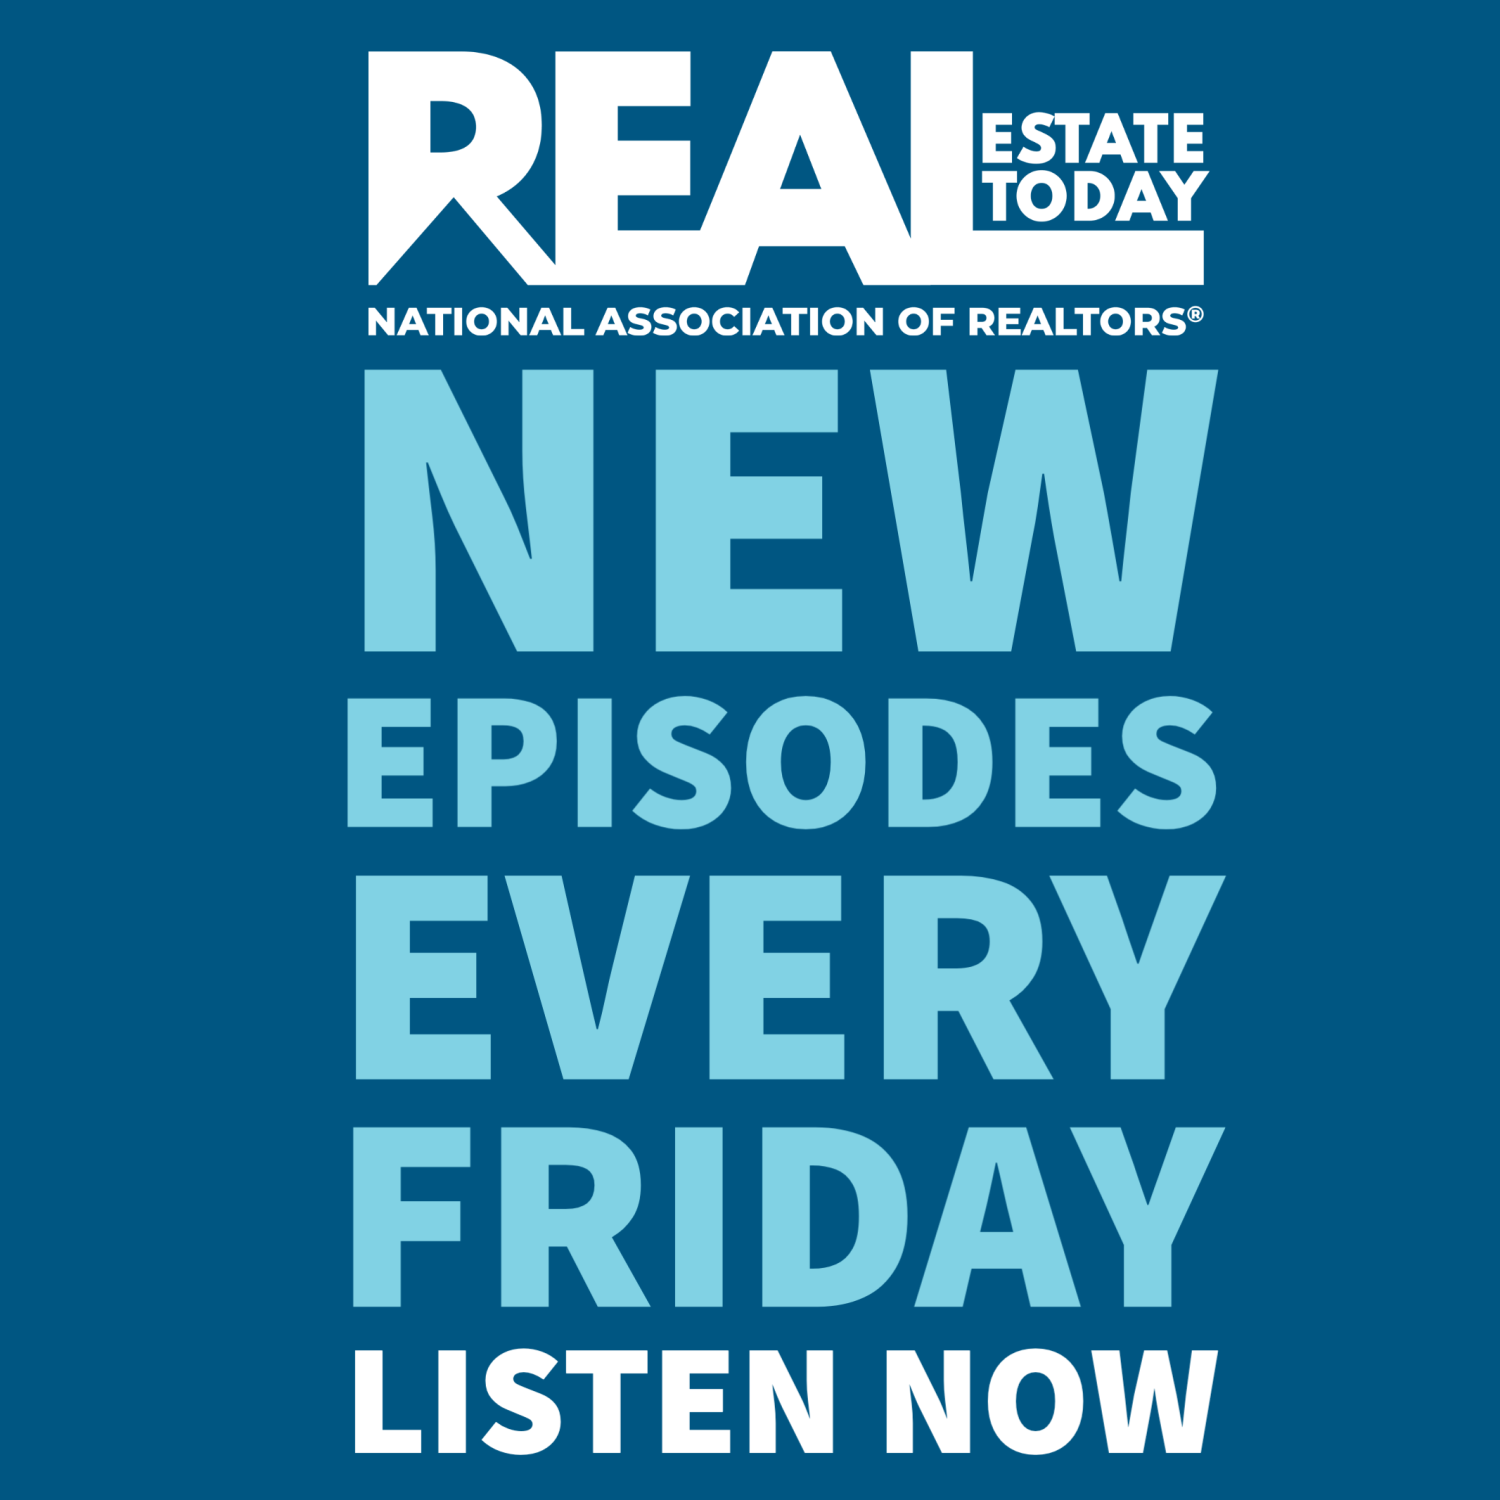 Real Estate Today Podcast releases new episodes every Friday. Listen Now!